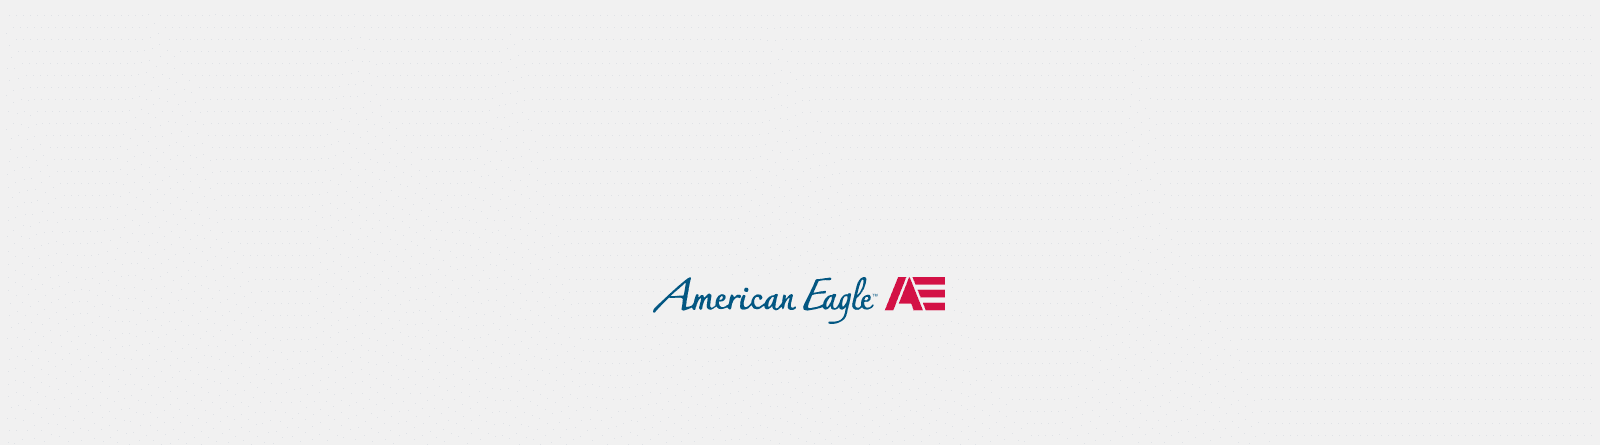 White American Eagle Logo - American Eagle Shoes, Boots, and Sandals